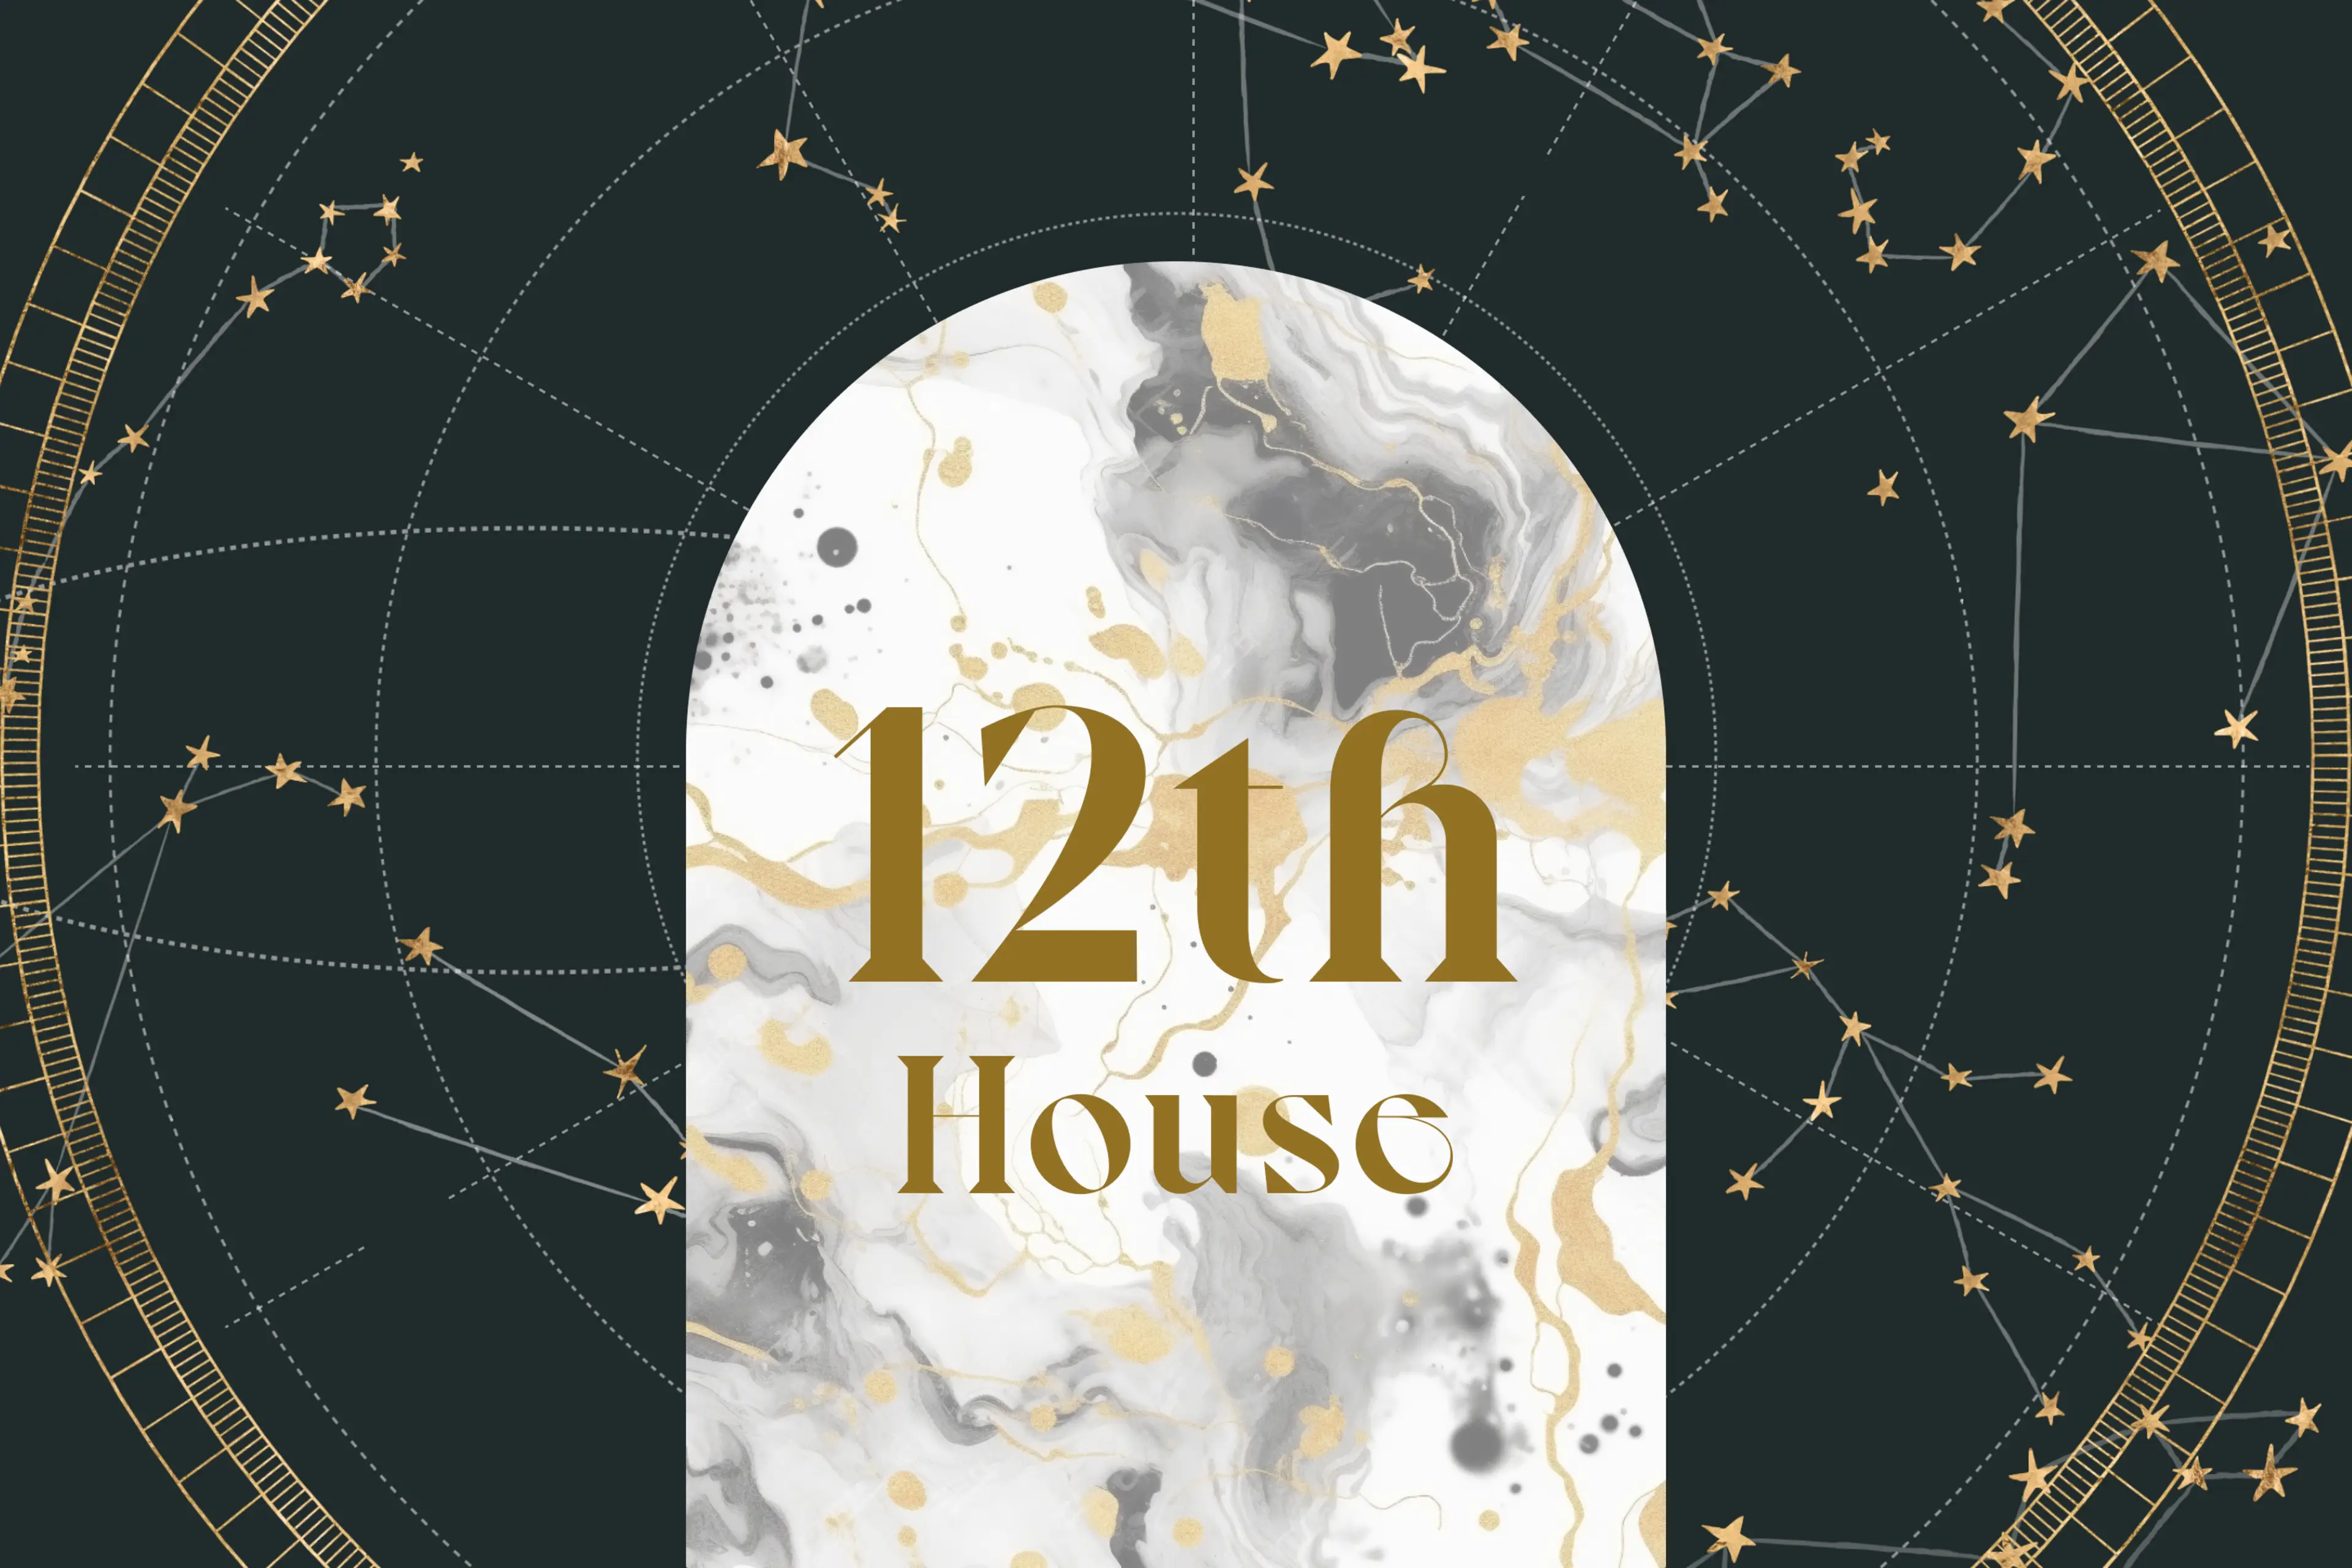 Twelfth House in Astrology